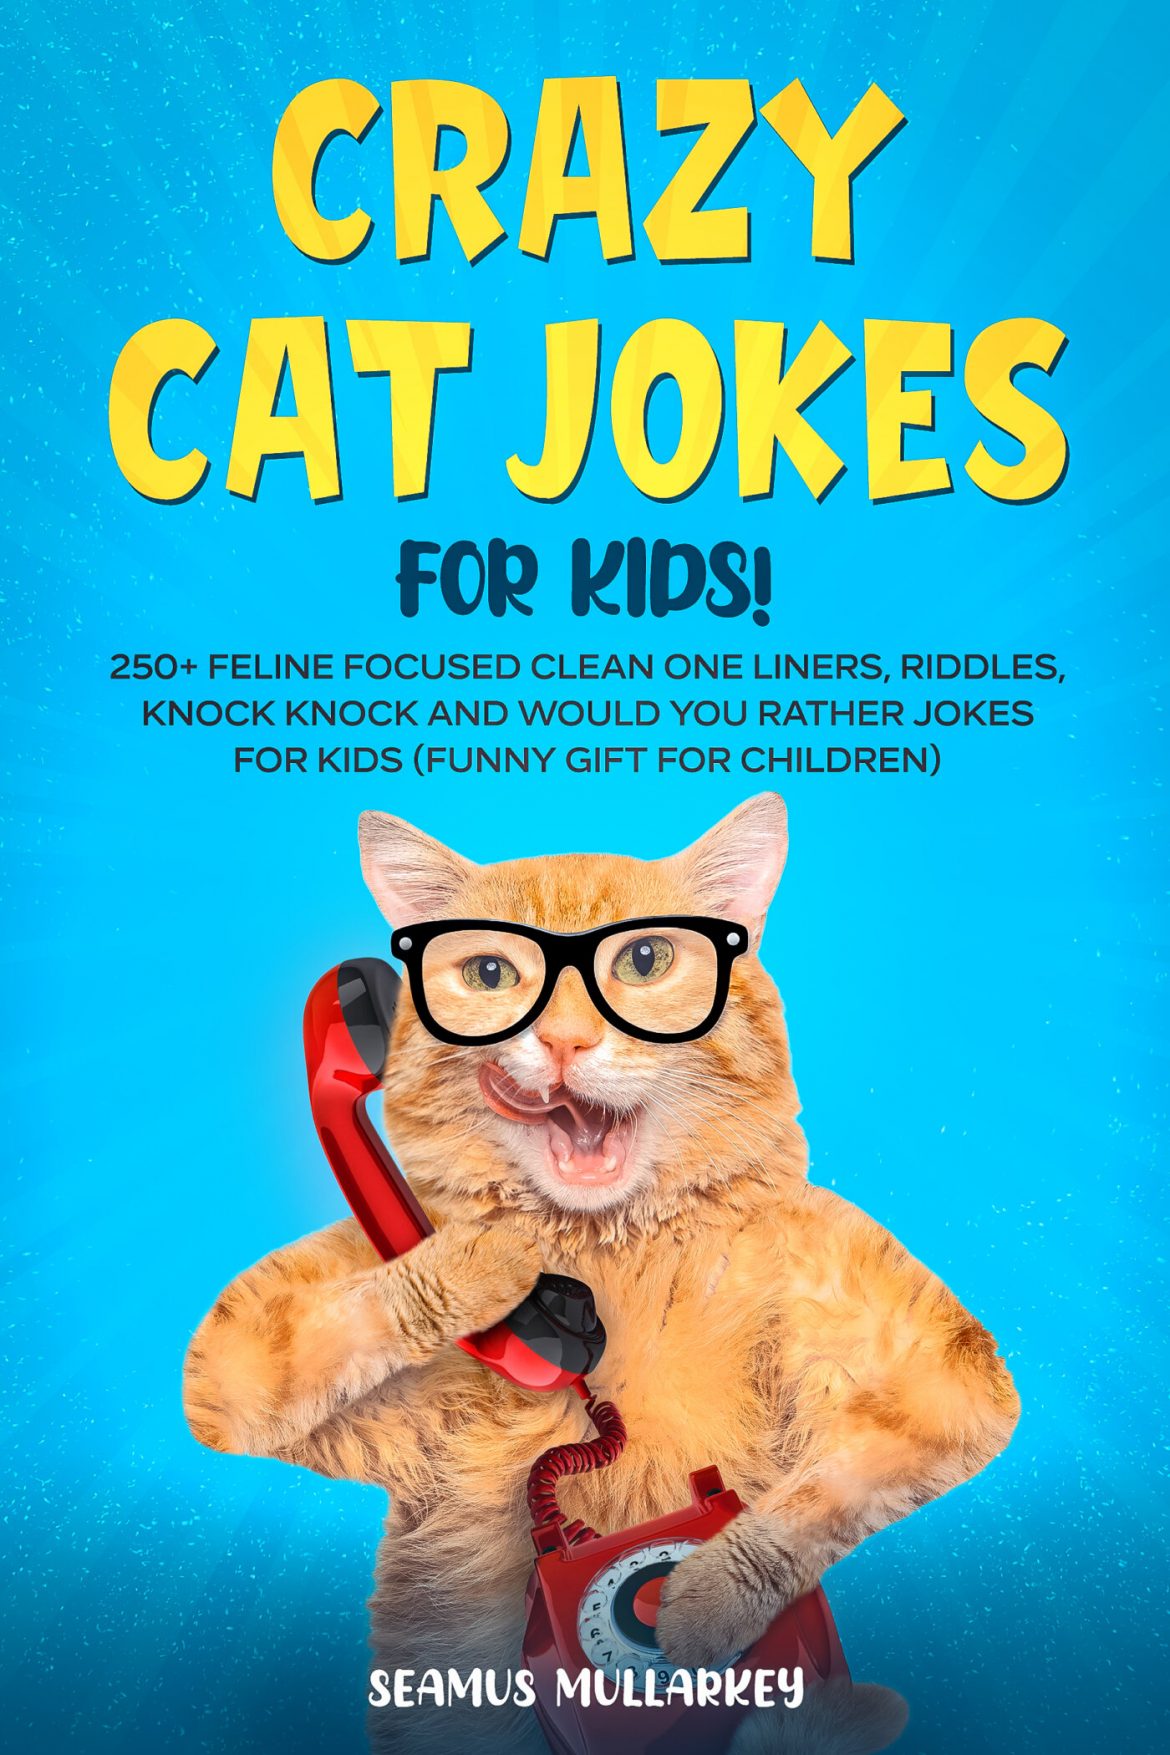 Do Your Kids Love Cats?